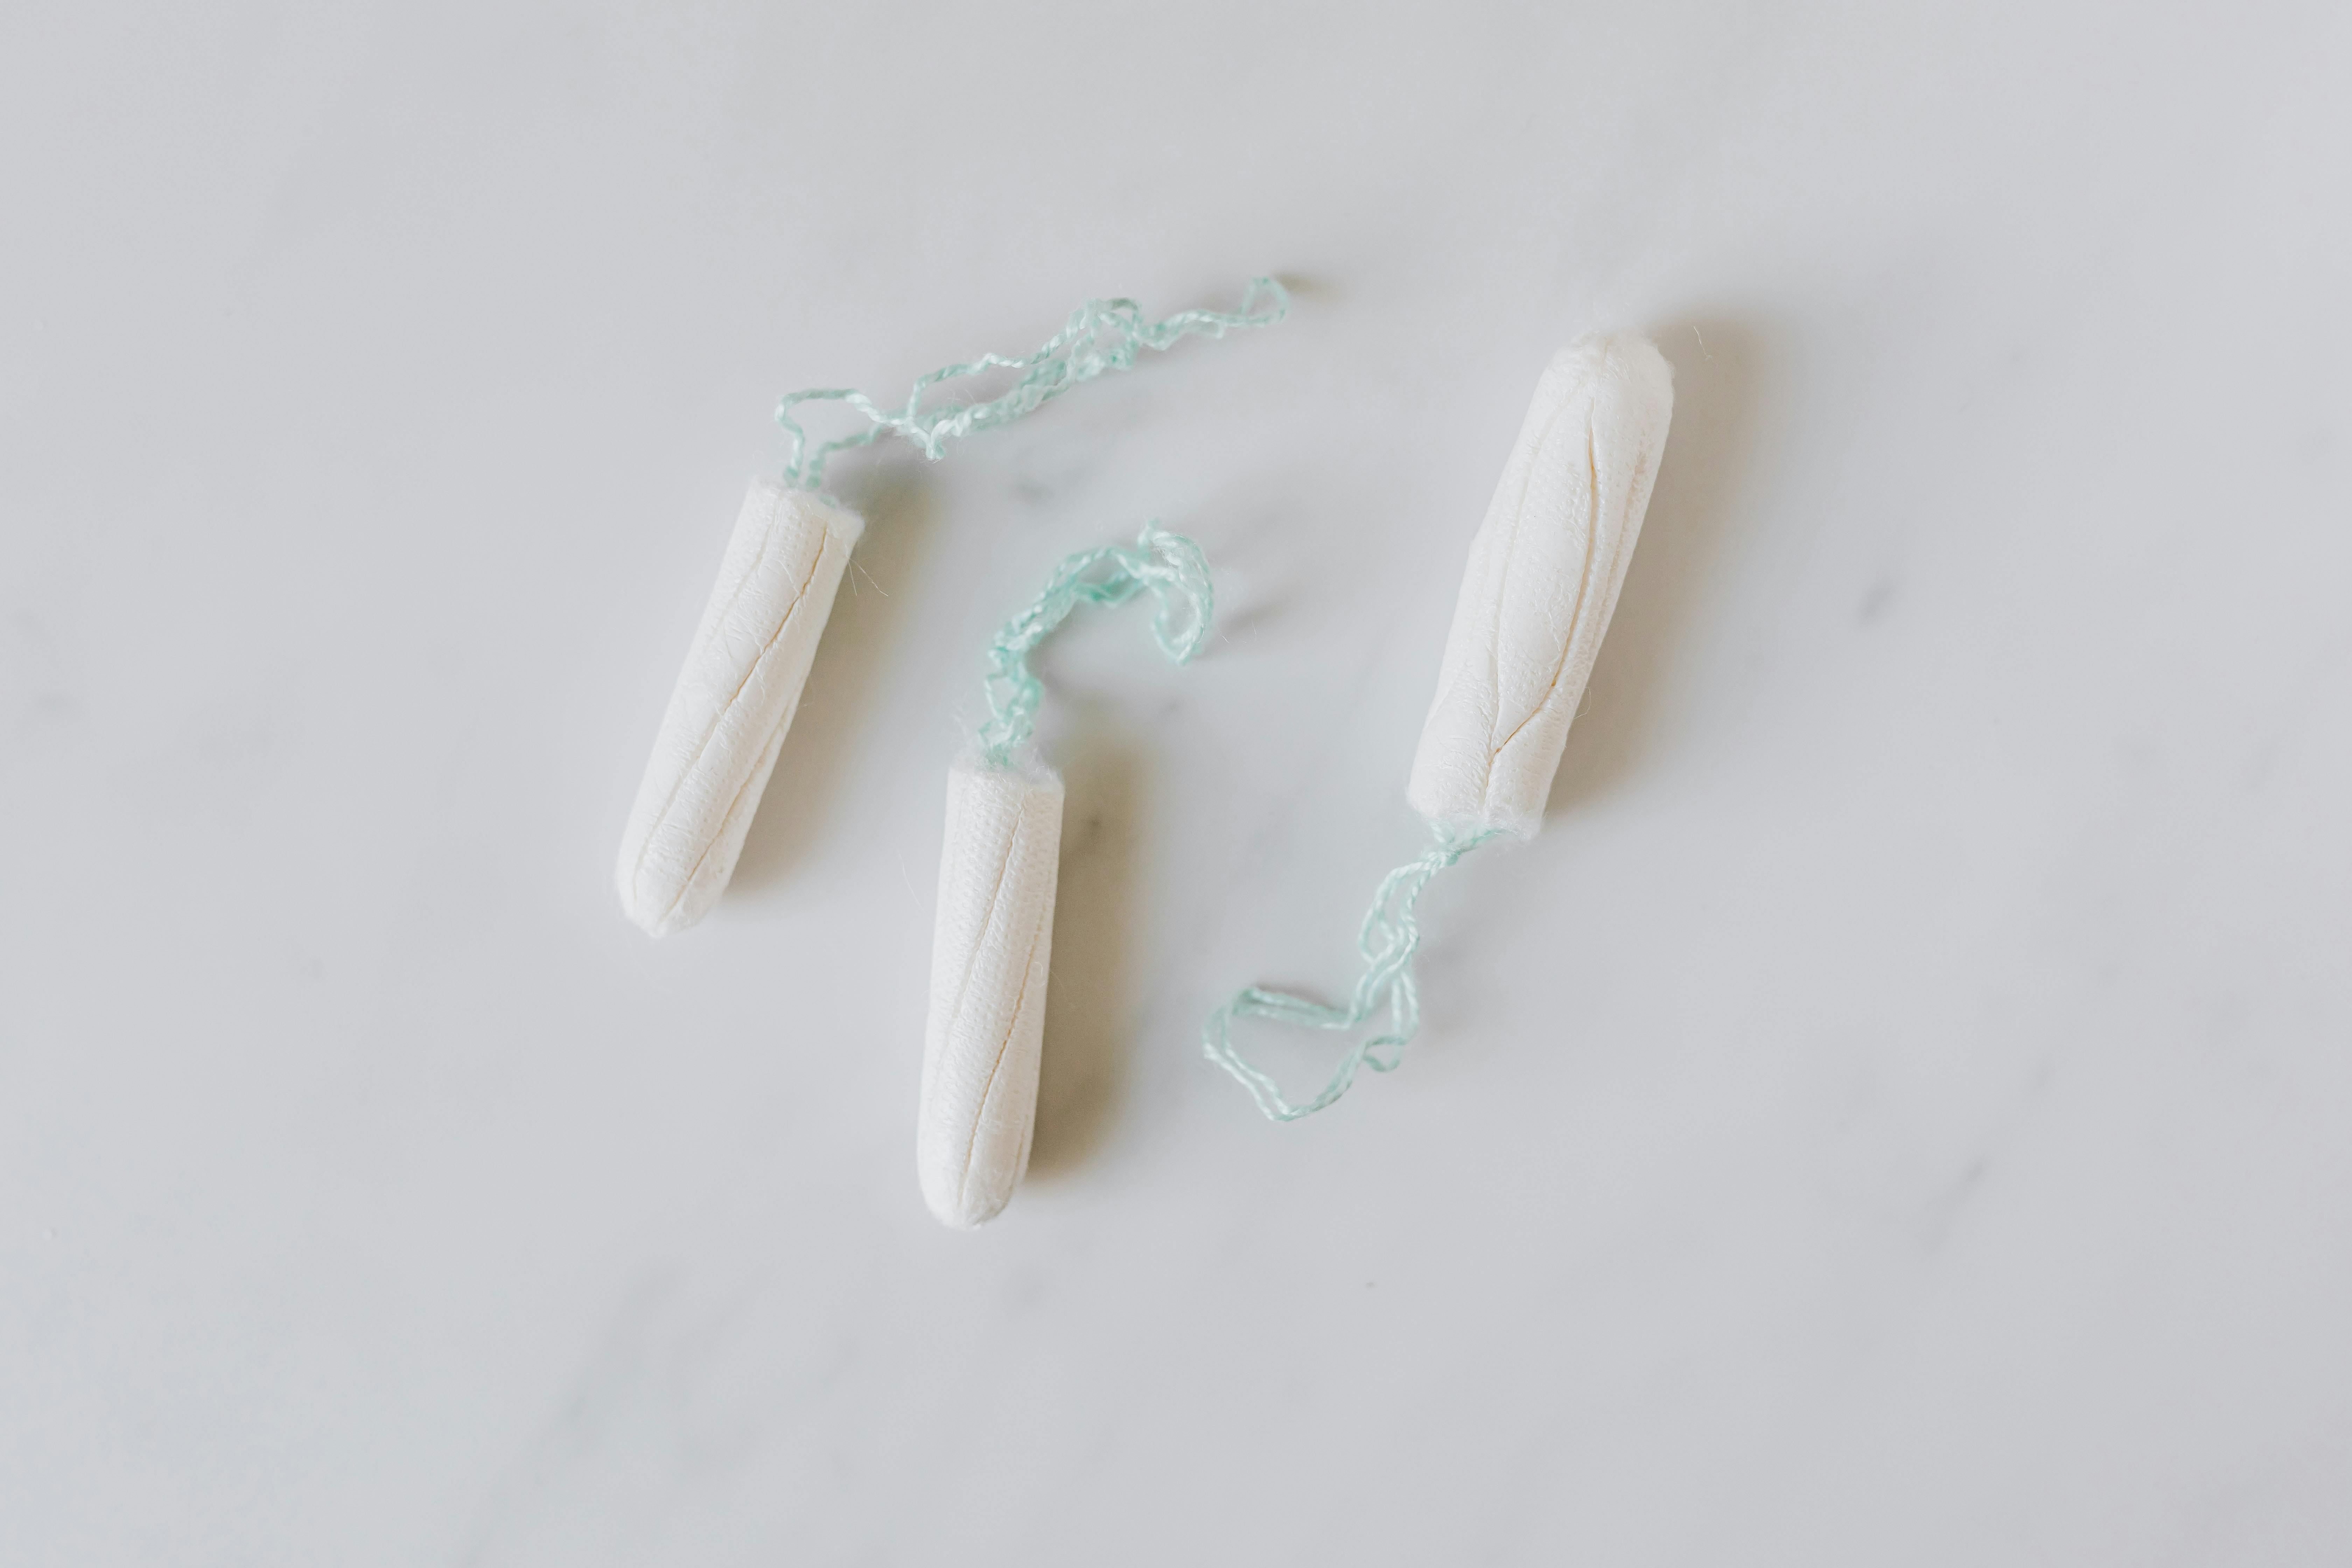 Three tampons on white background